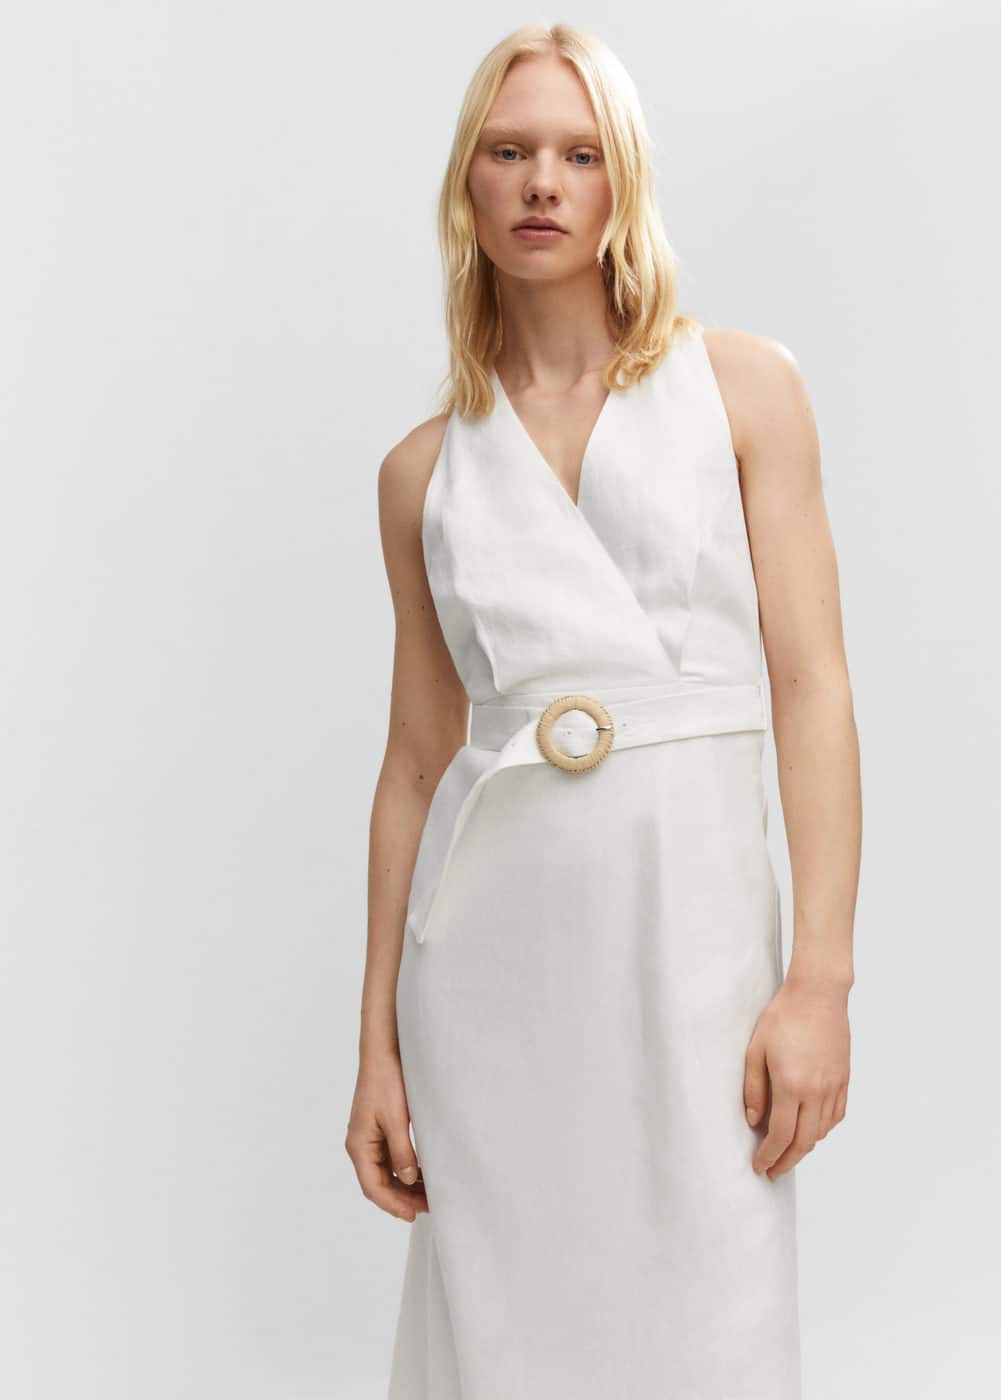 I Predict This Mango Linen Dress Will a Quick Sell-Out | Who What